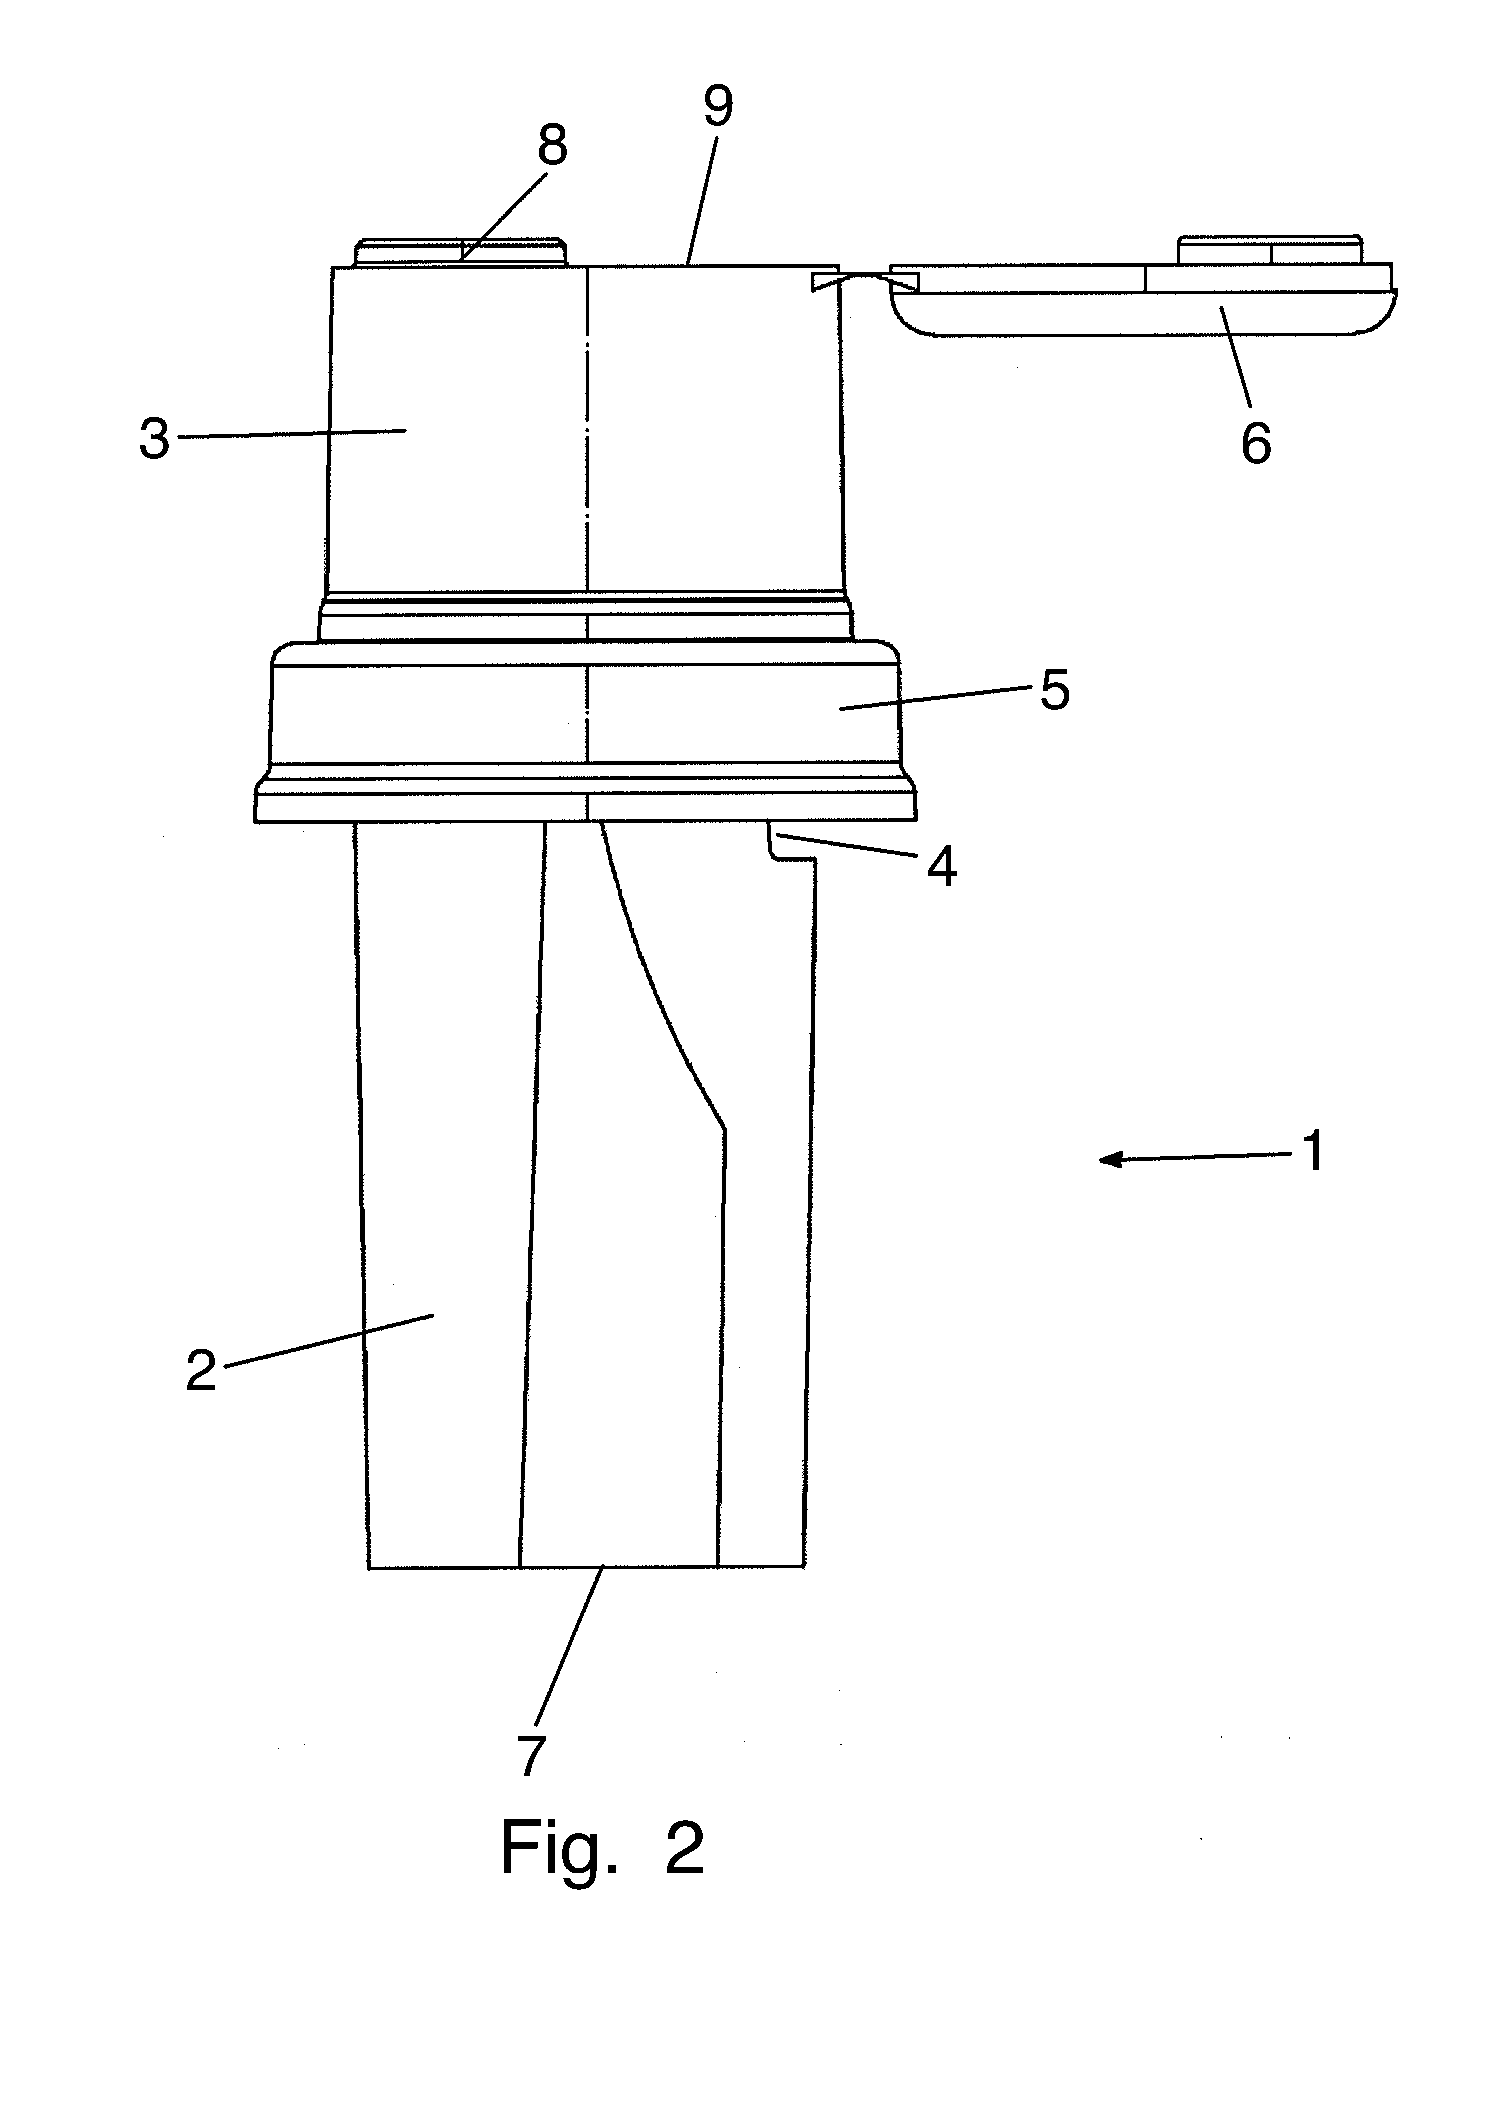 Dispensing device for dispensing a liquid product